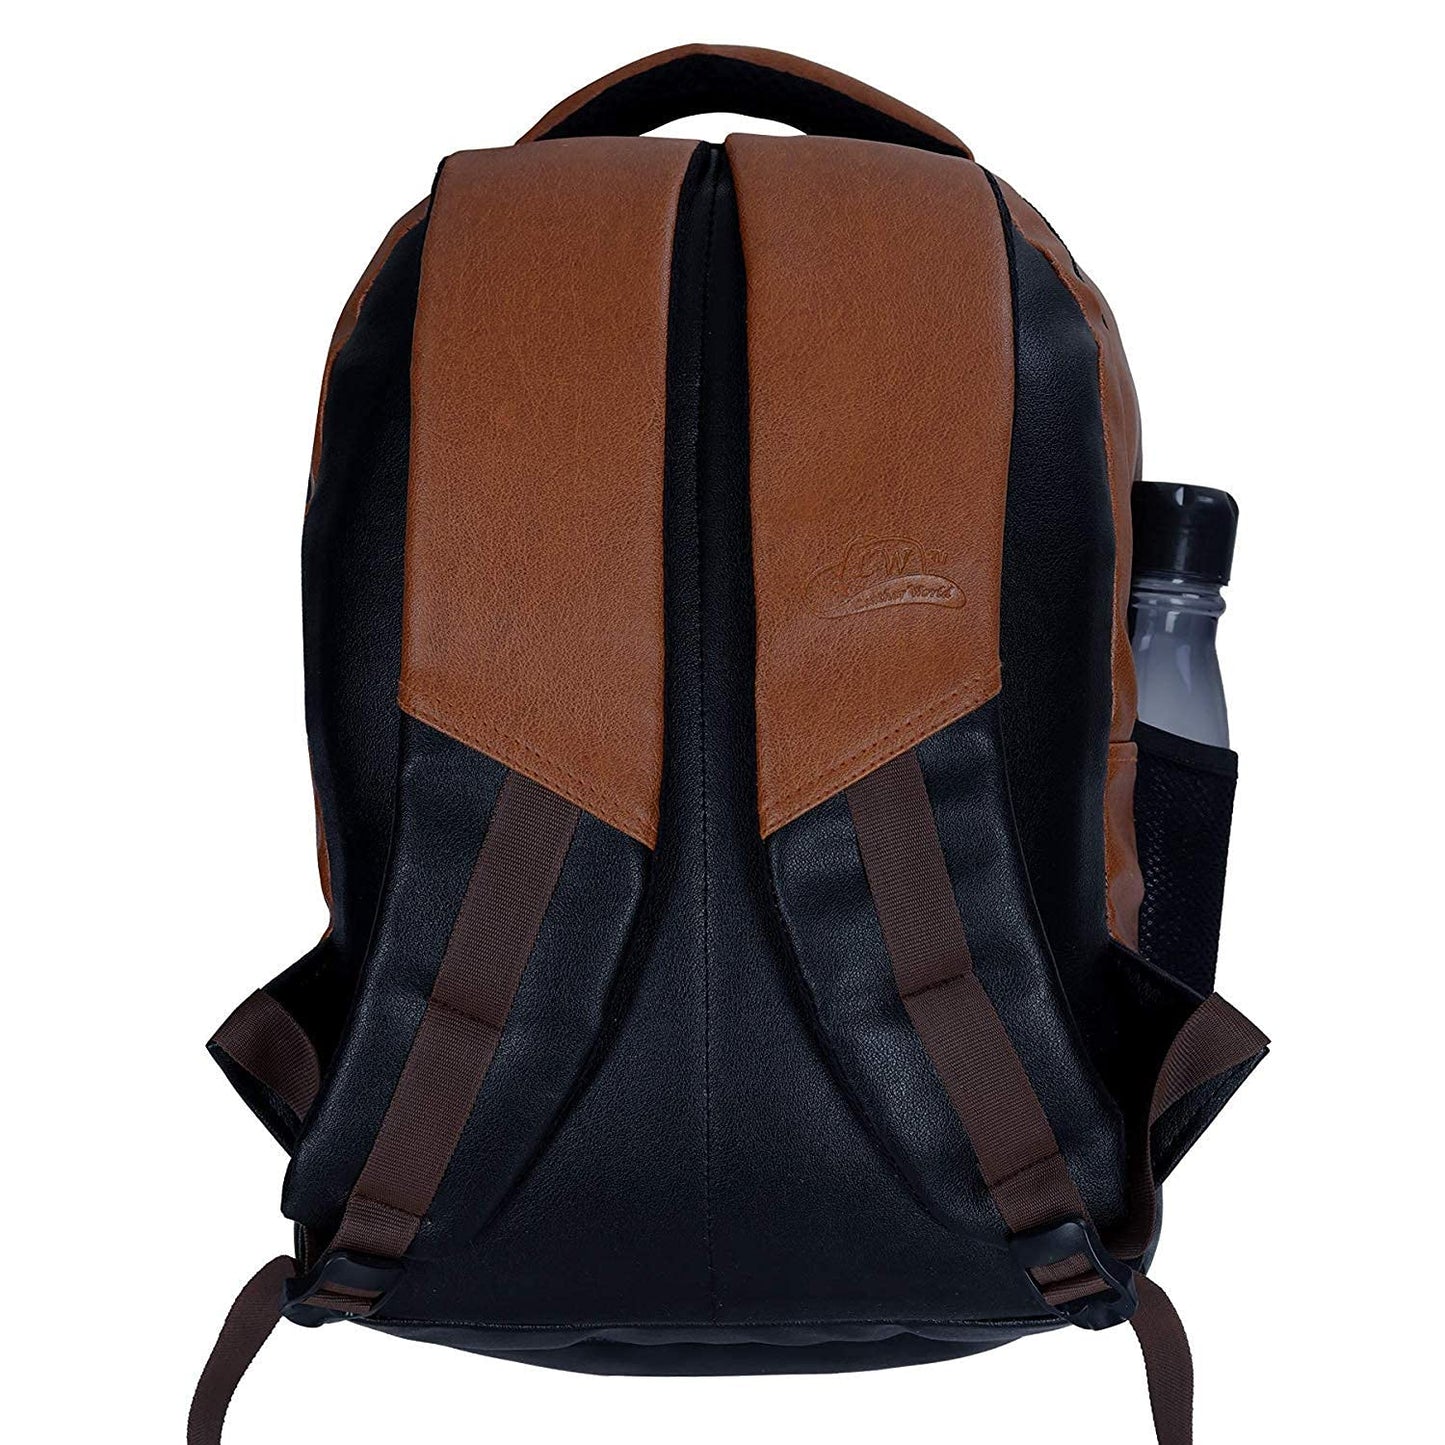 Leather World Tan PU Leather College Office Laptop Backpack with USB